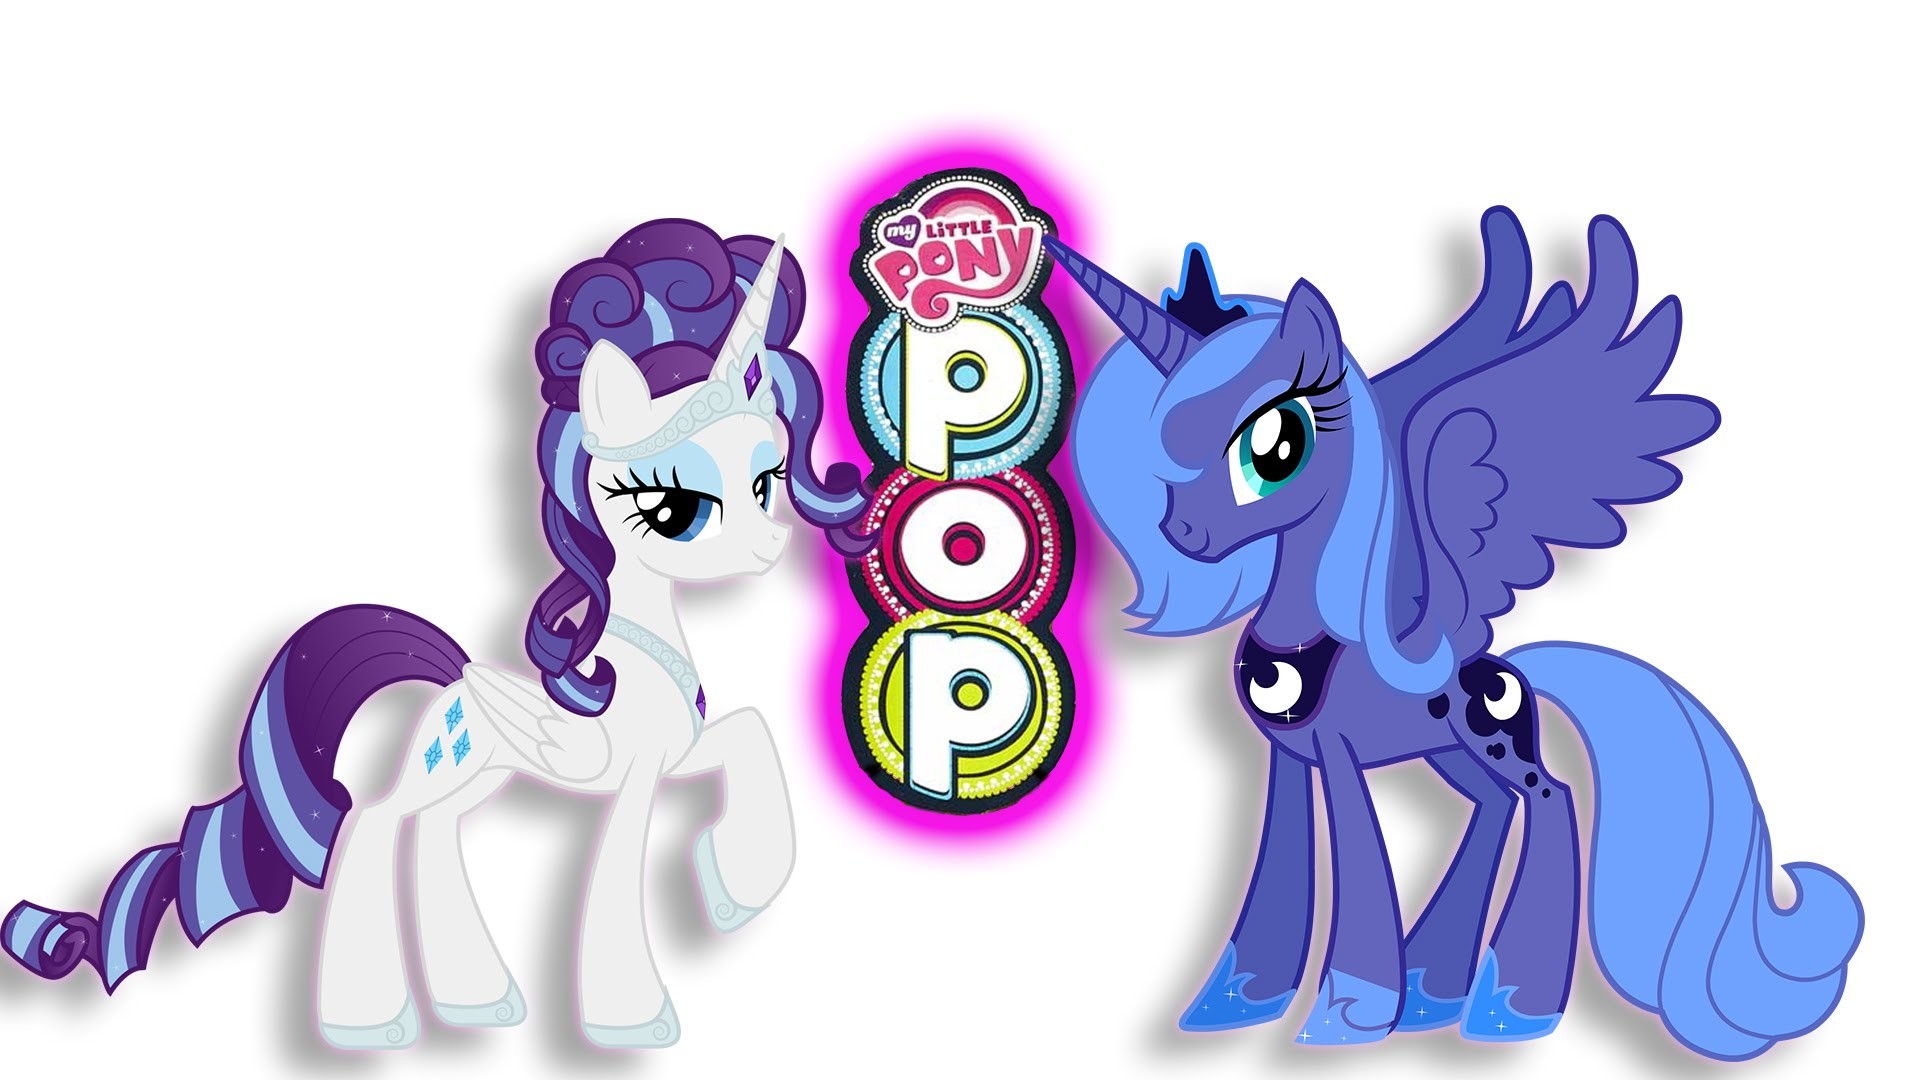 1920x1080 MY LITTLE PONY POP Princess Luna & Rarity Build your Ponies snap and design  by FunToys - YouTube